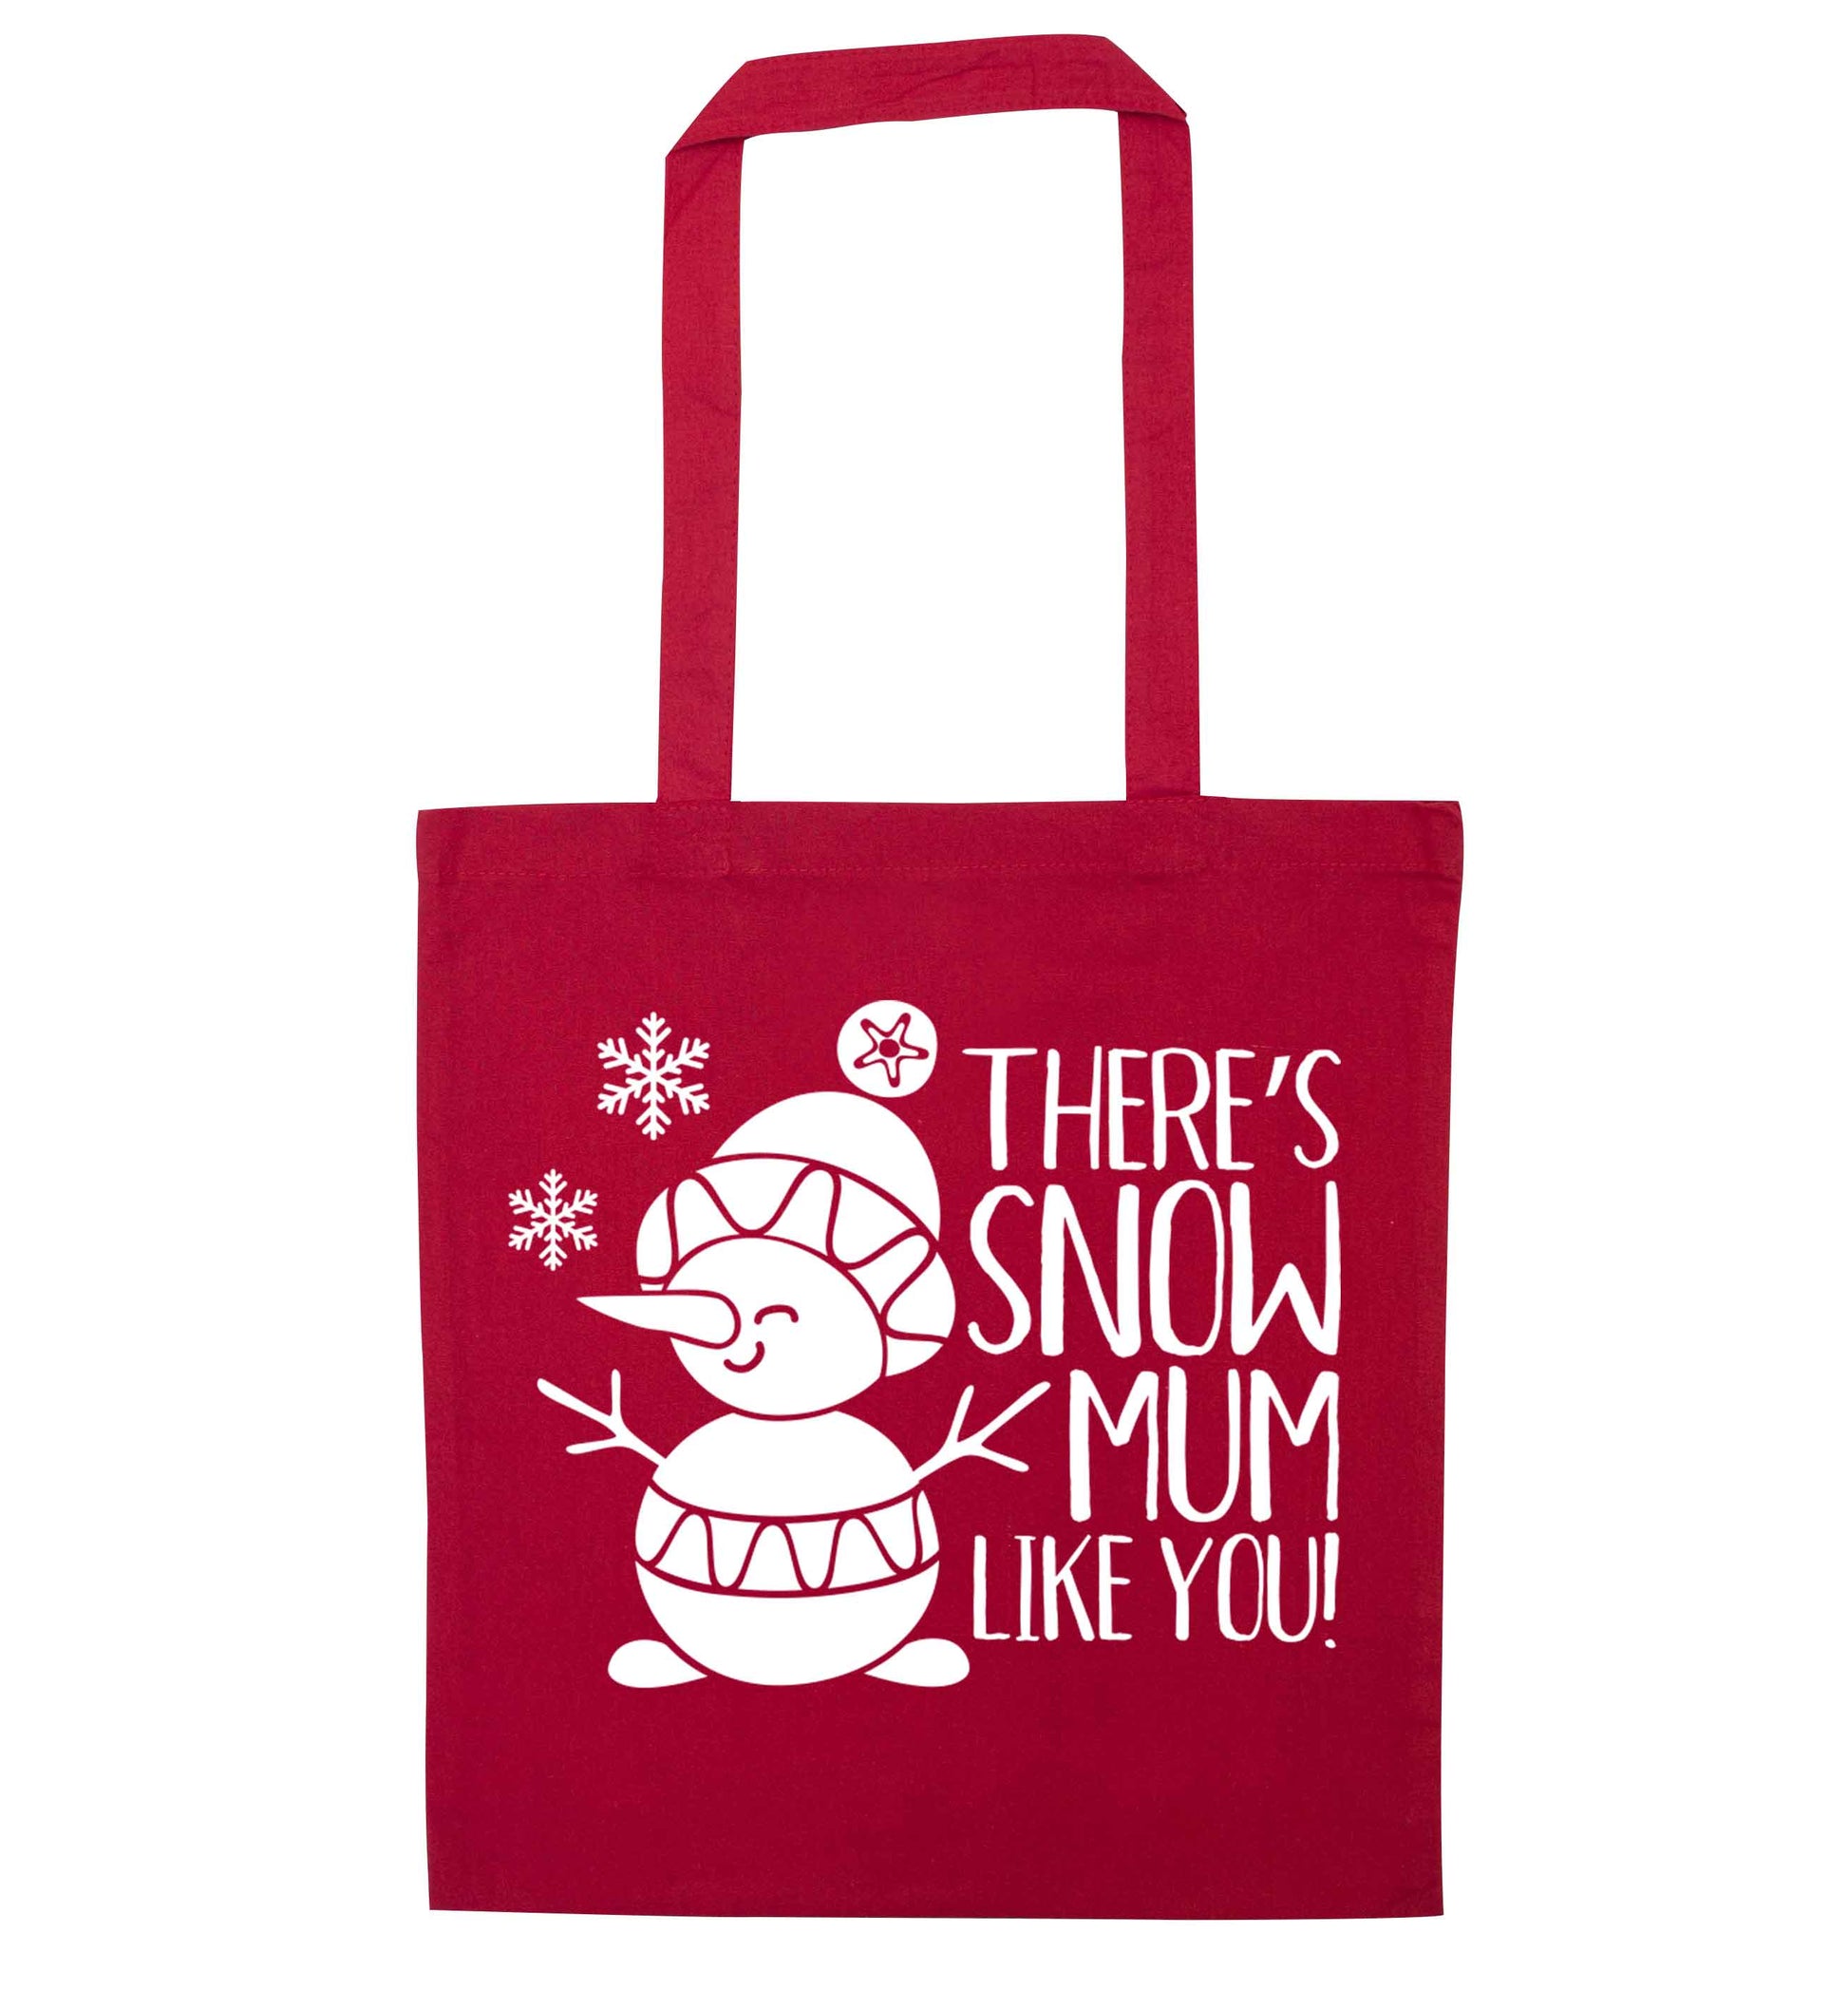 There's snow mum like you red tote bag